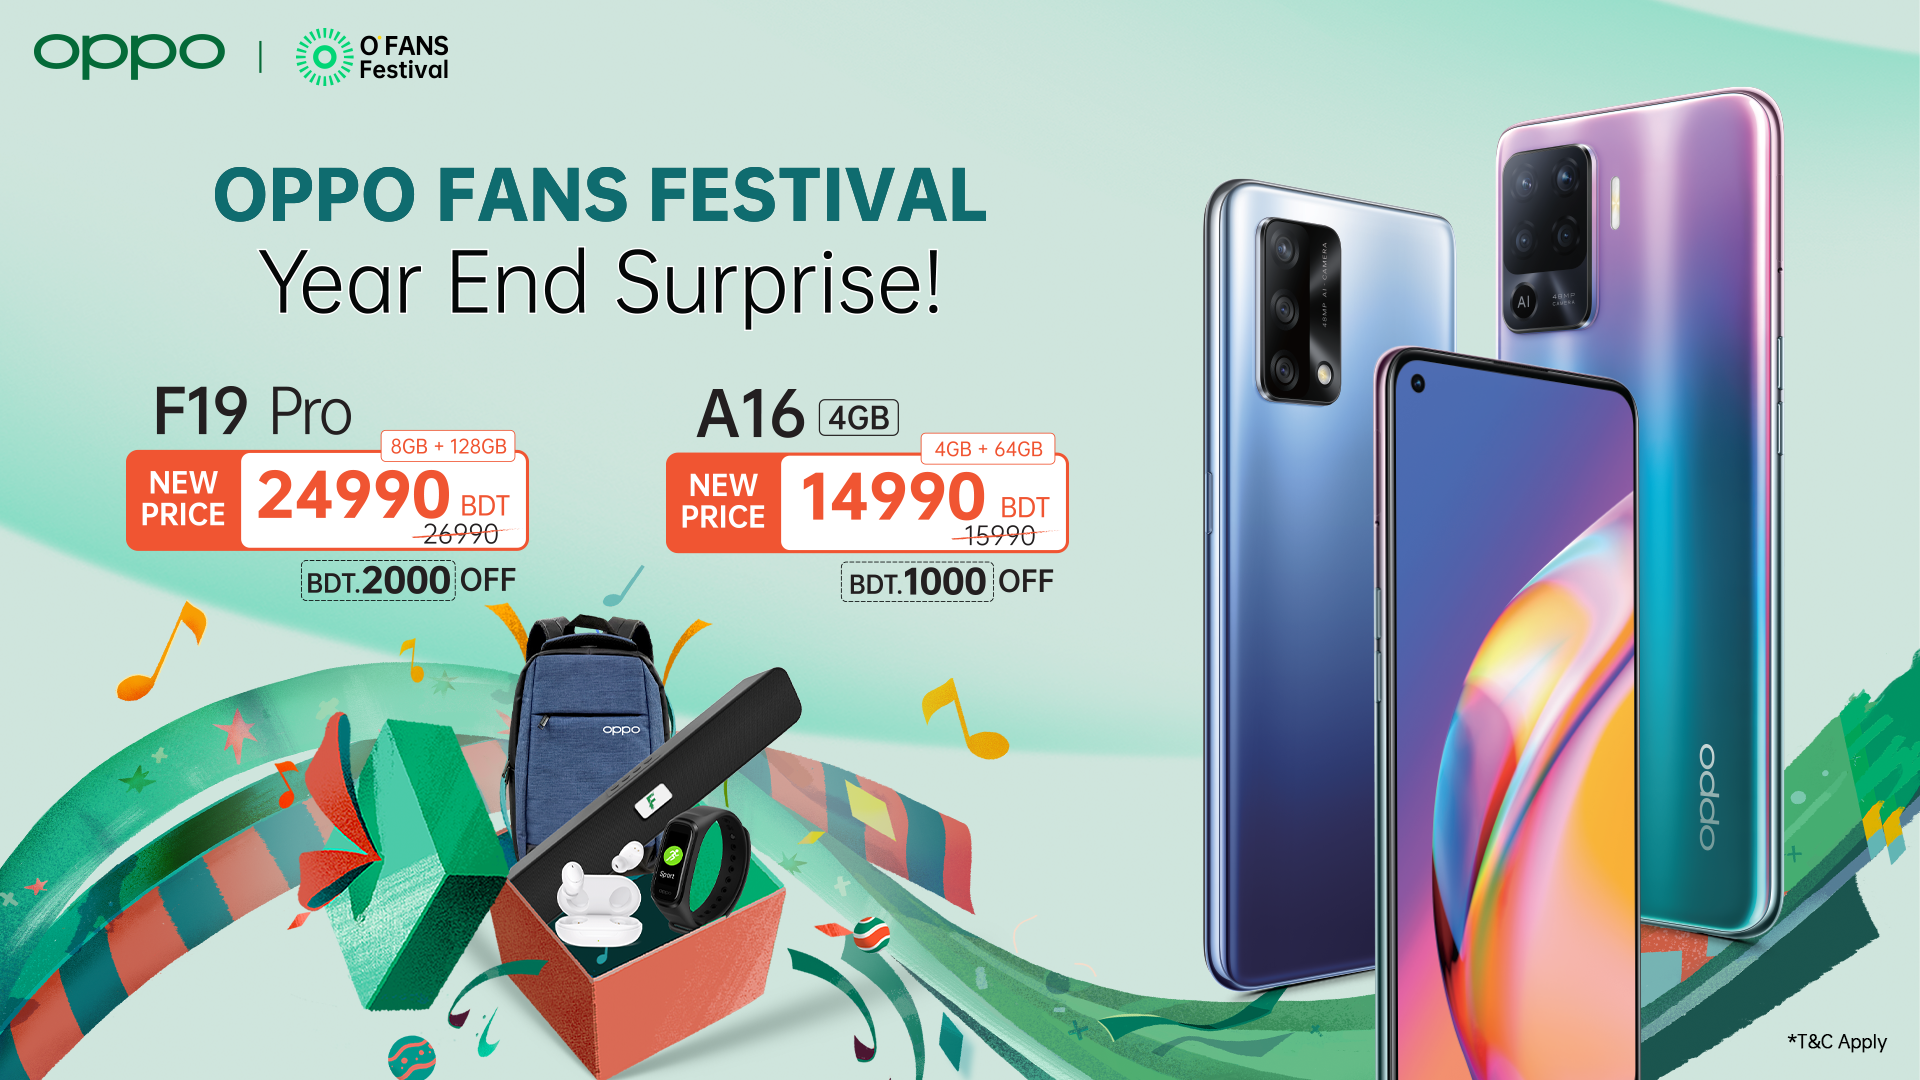 Year-end new bonanza Price Offer for OPPO users and fans of F19 Pro and A16(4GB)